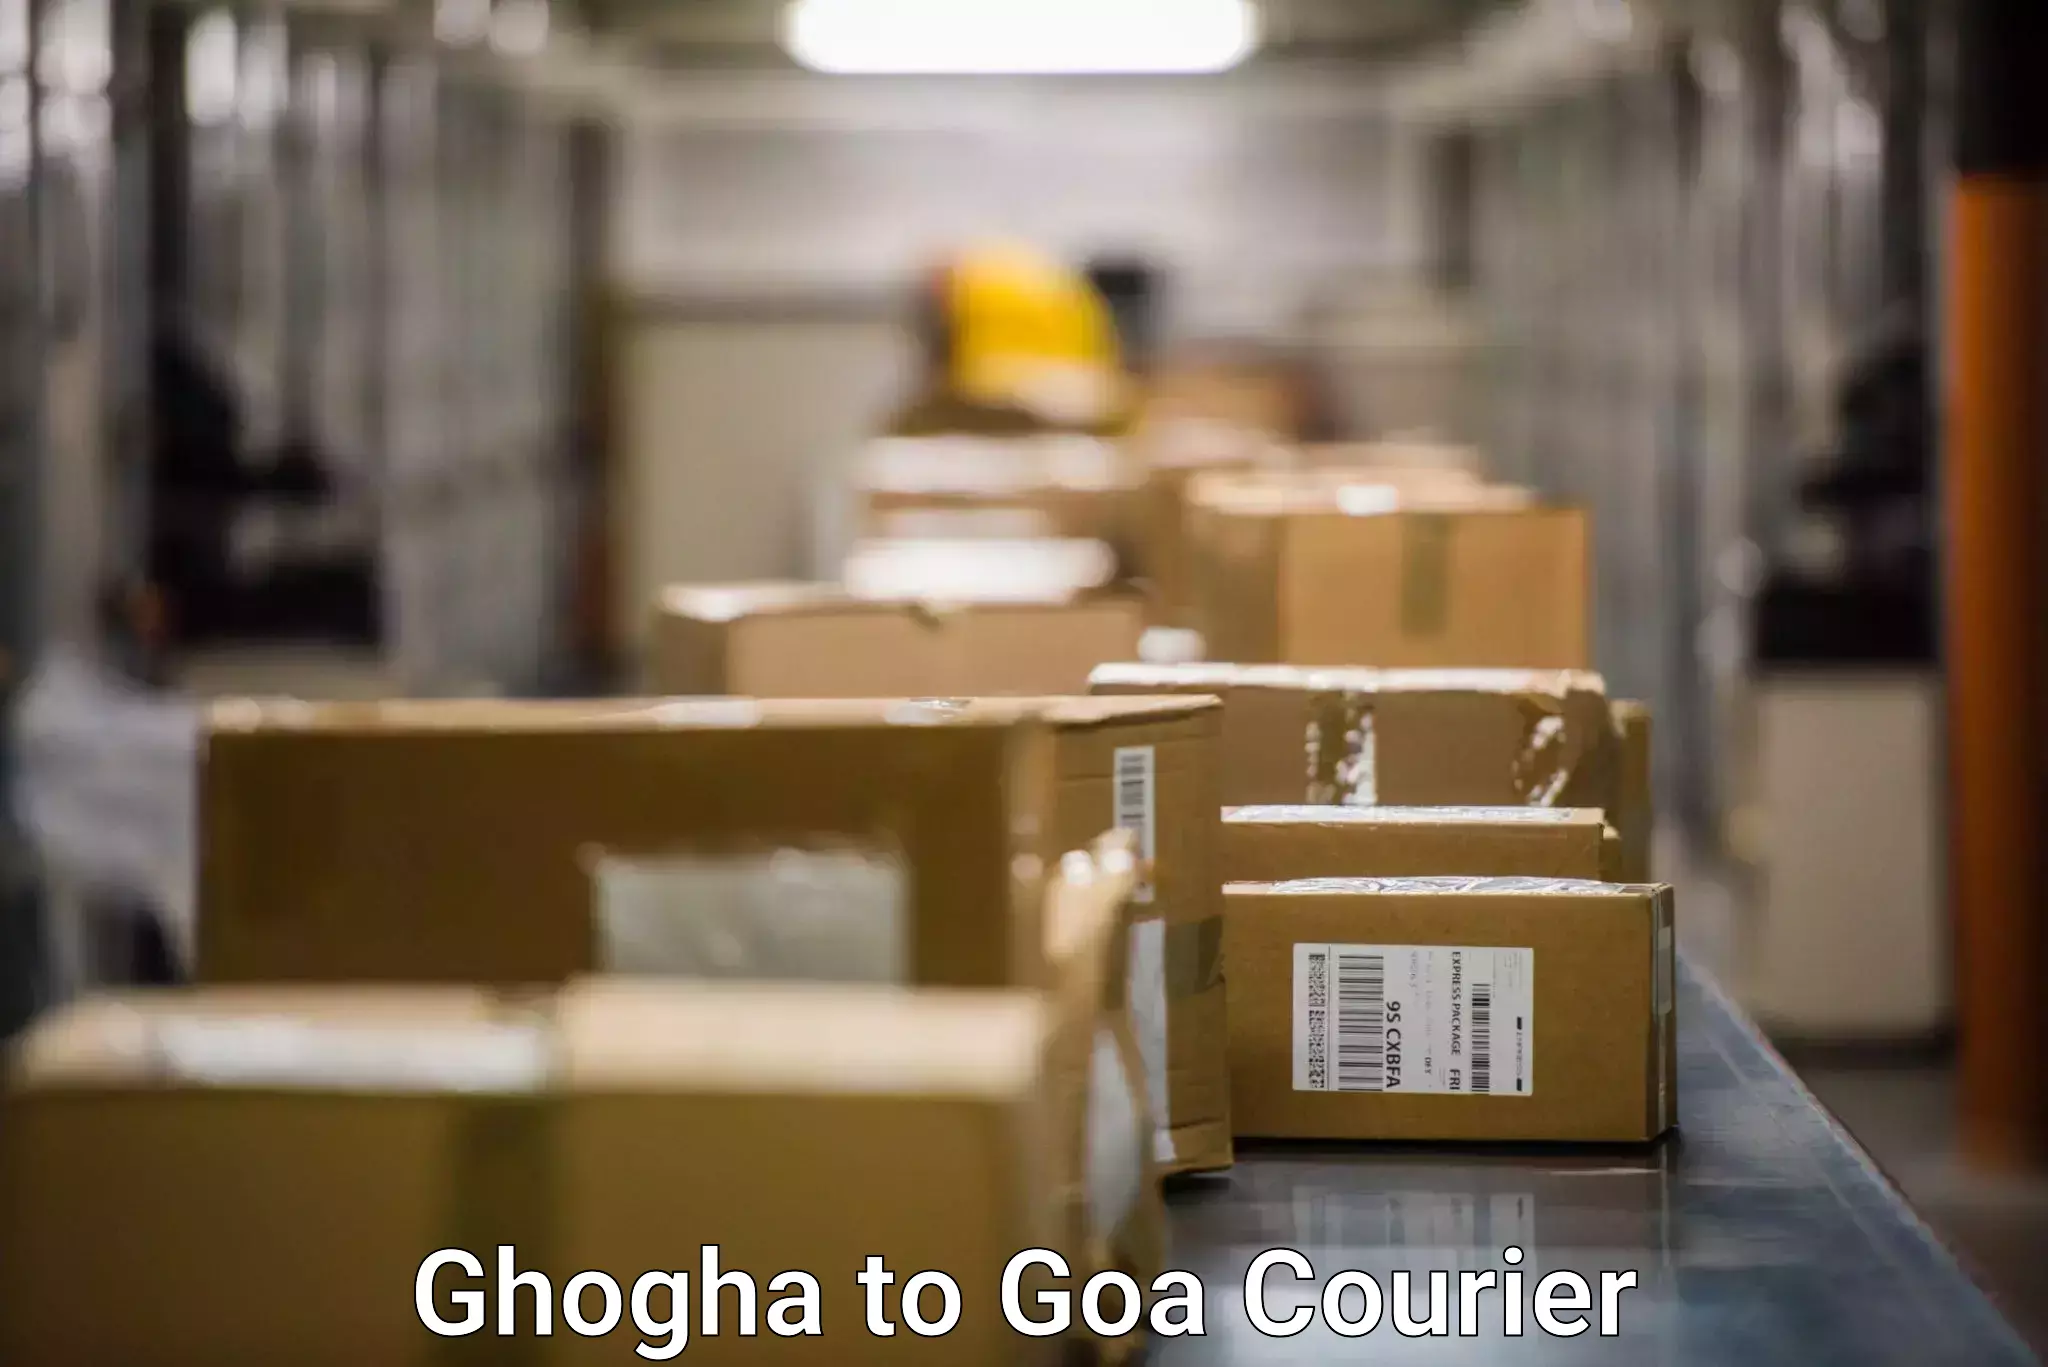 Courier service innovation in Ghogha to Mormugao Port